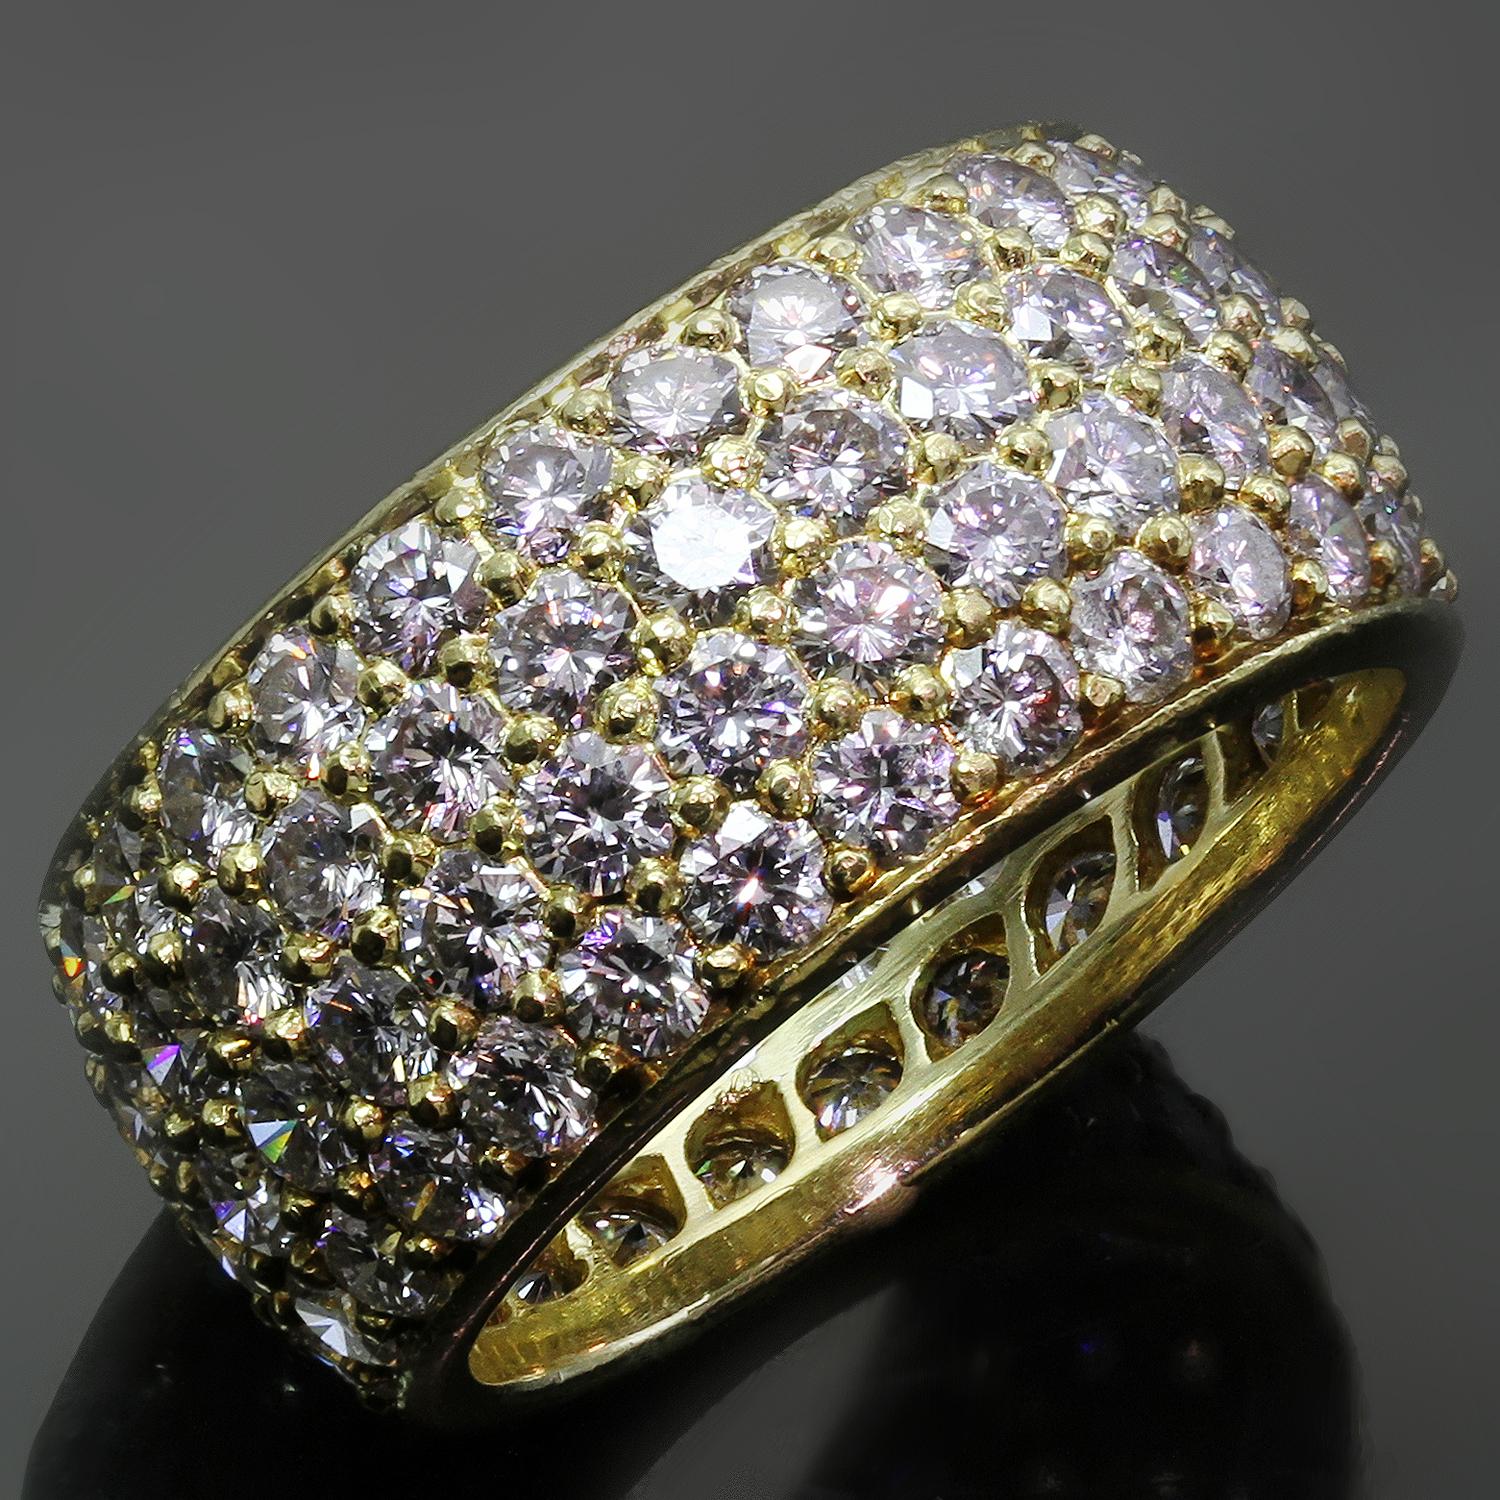 This classic vintage Van Cleef & Arpels wide eternity band is crafted in 18k yellow gold and pave-set with round brilliant D-F VVS1-VVS2 diamonds weighing an estimated 5.10-5.25 carats. Made in France circa 1980s. Measurements: 0.35